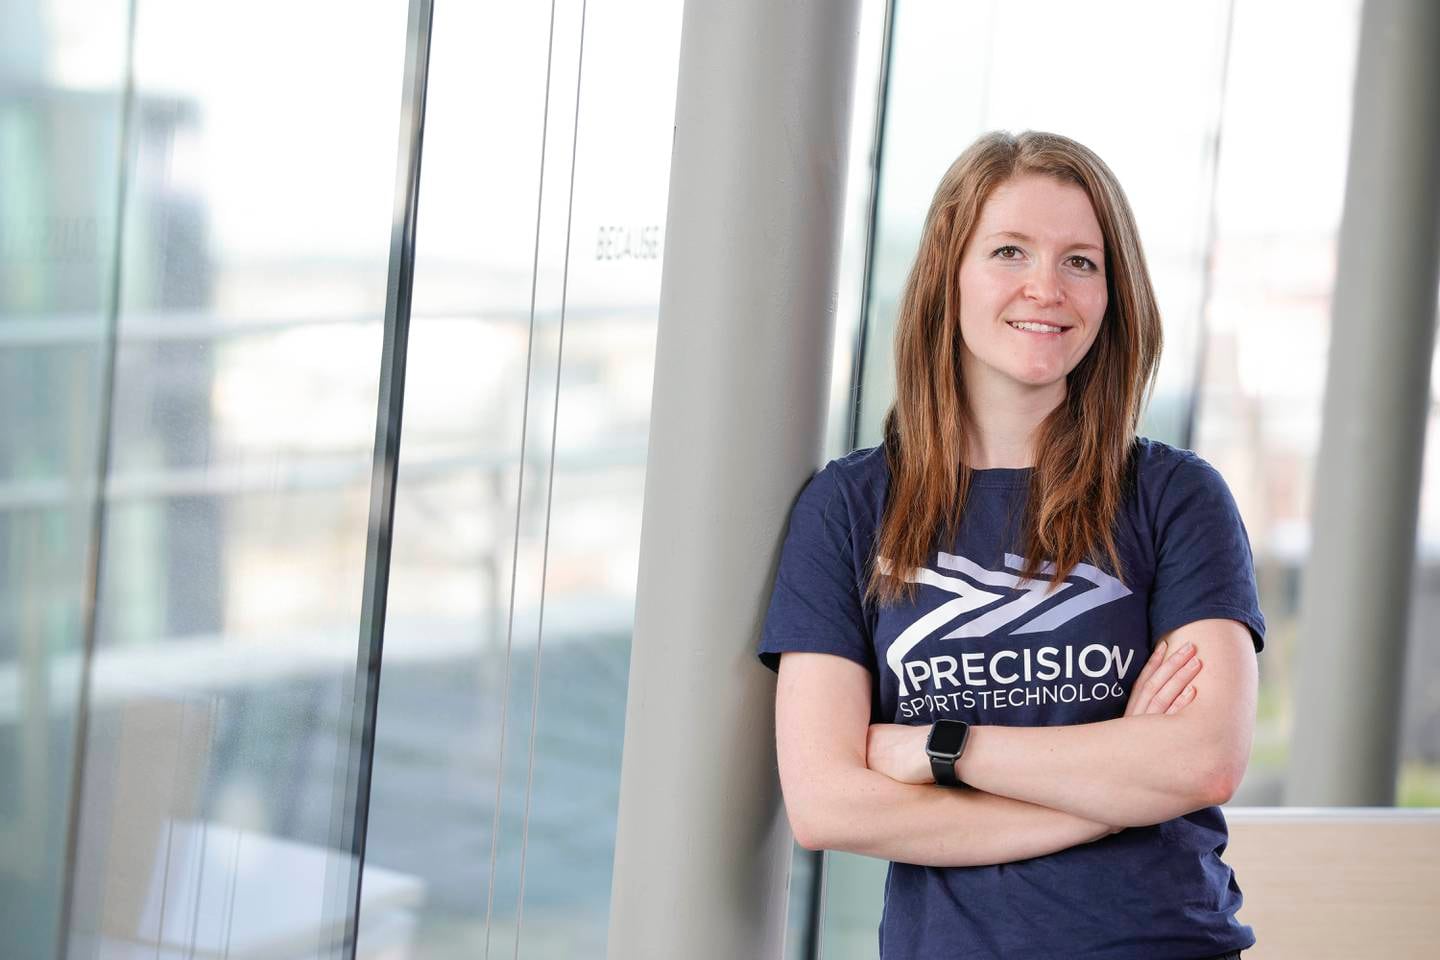 Emma Meehan of Precision Sports Technology at The Irish Times Innovation Awards 2023 final judging day. Photograph: Conor McCabe Photography.